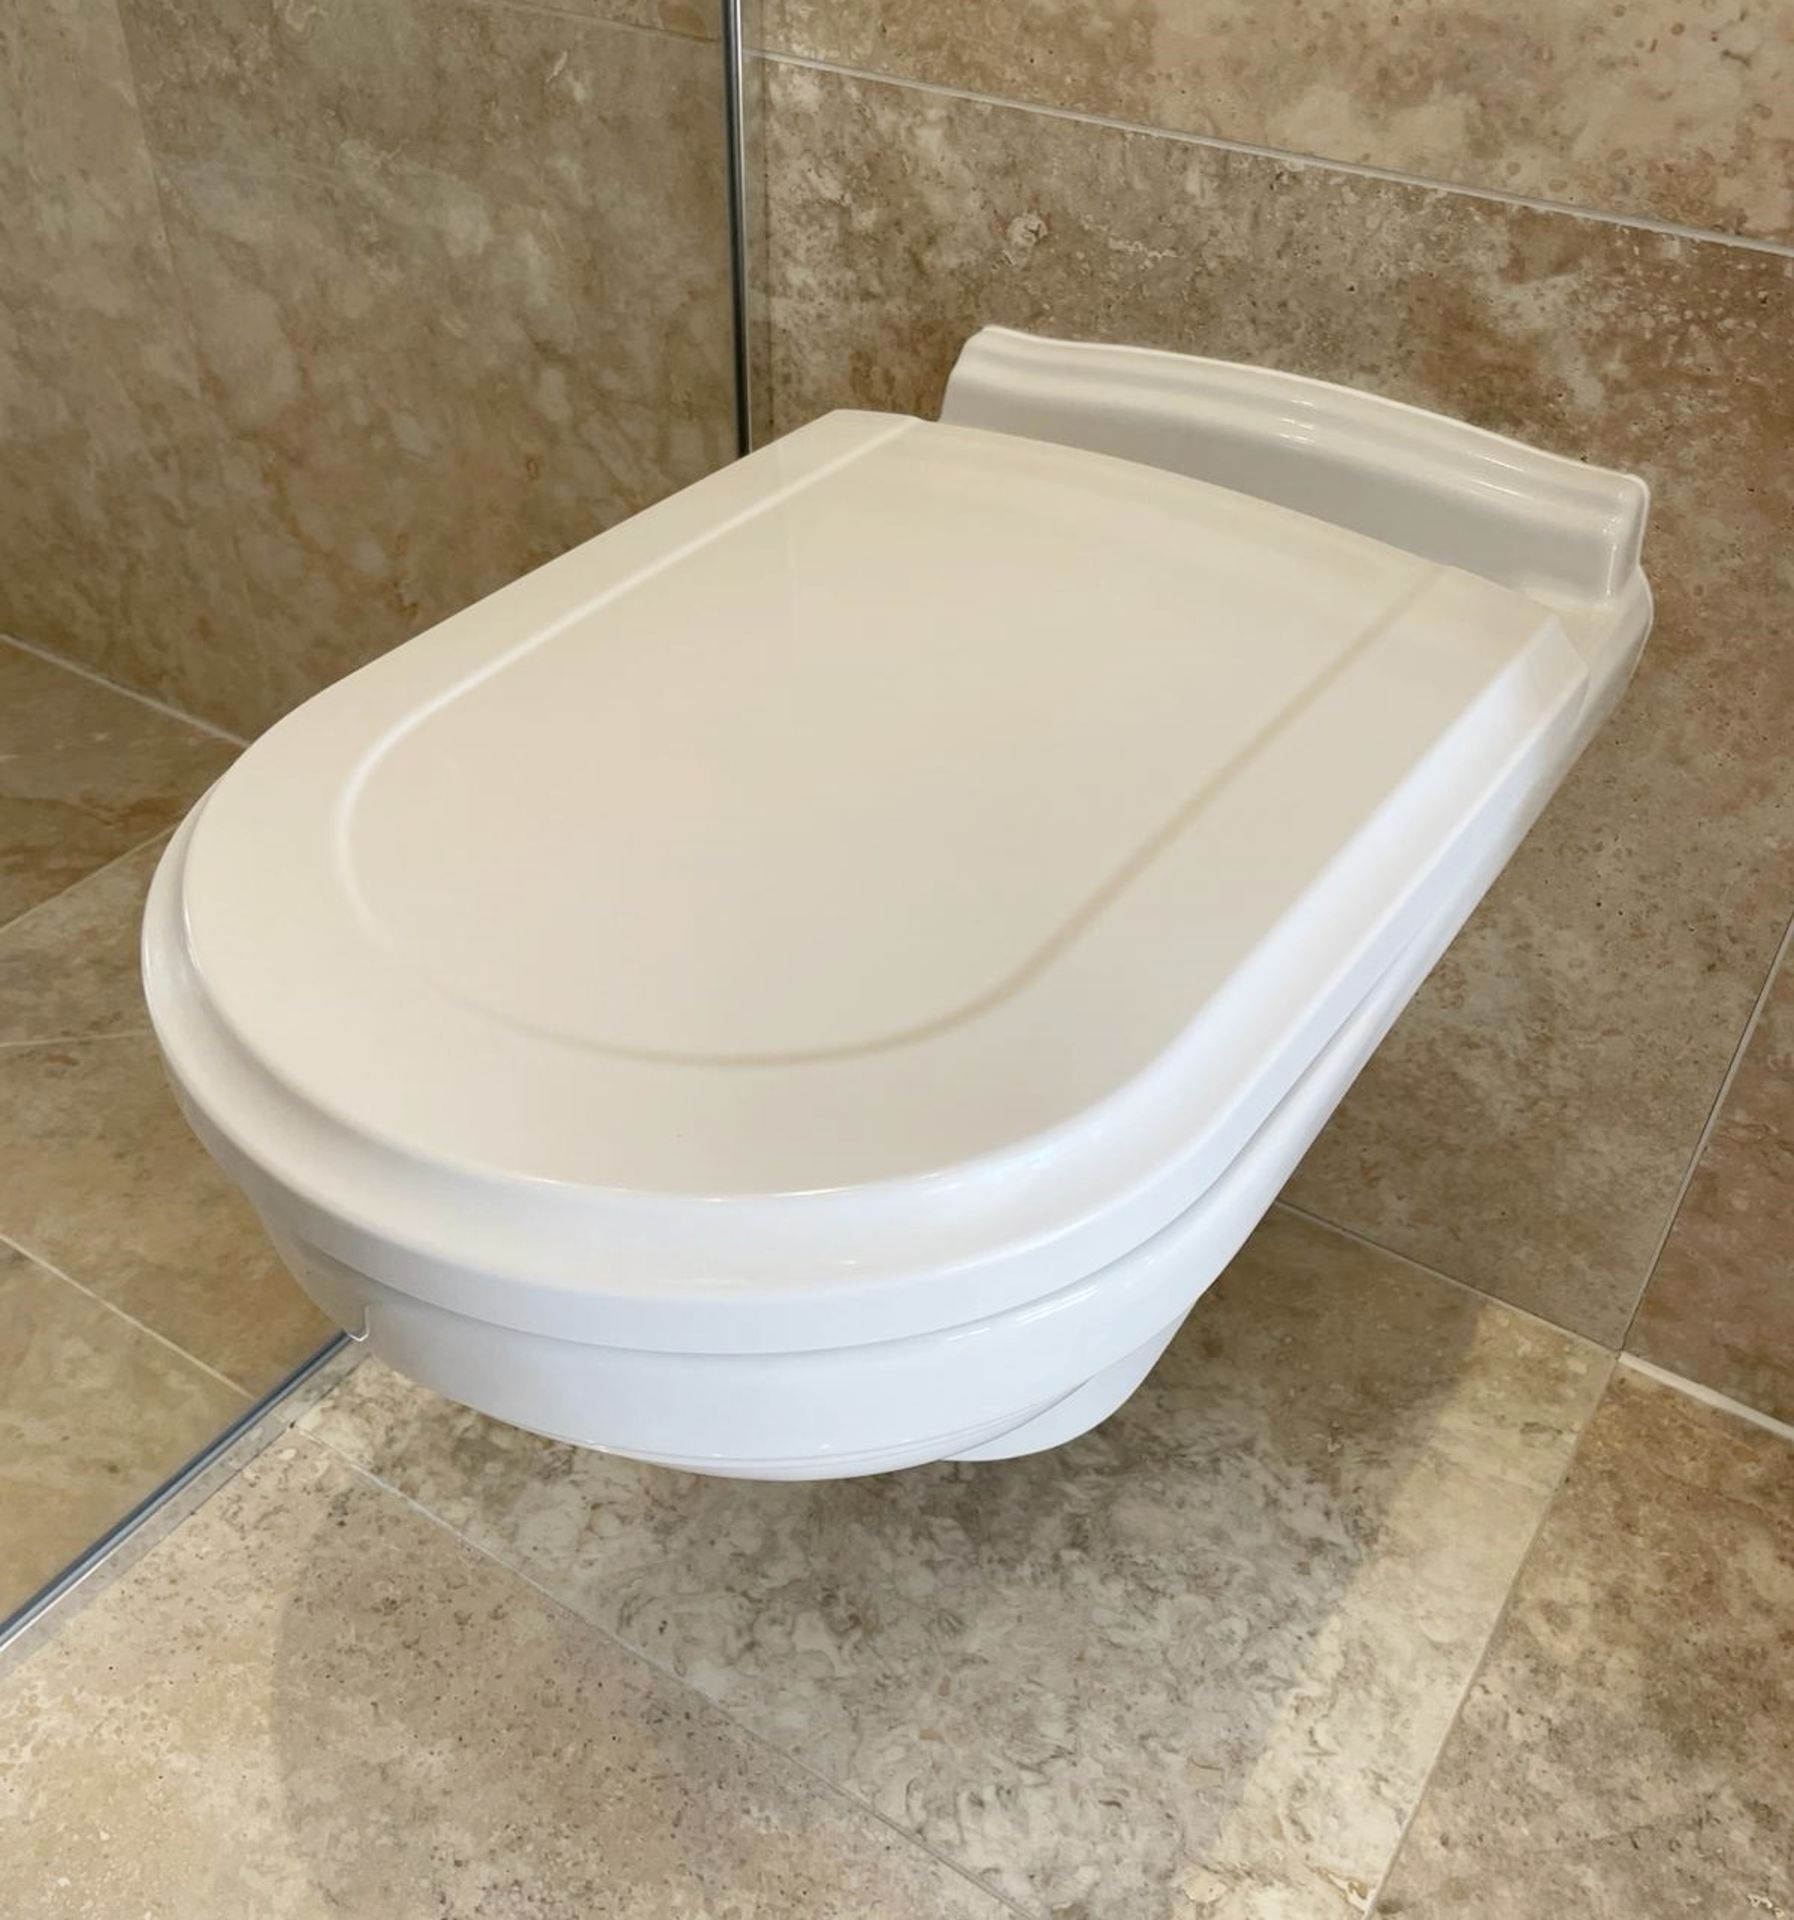 1 x VILLEROY & BOCH Wall Hung Toilet with Geberit Flush Plate - Ref: PAN273 BED3bth - CL896 - NO VAT - Image 9 of 9